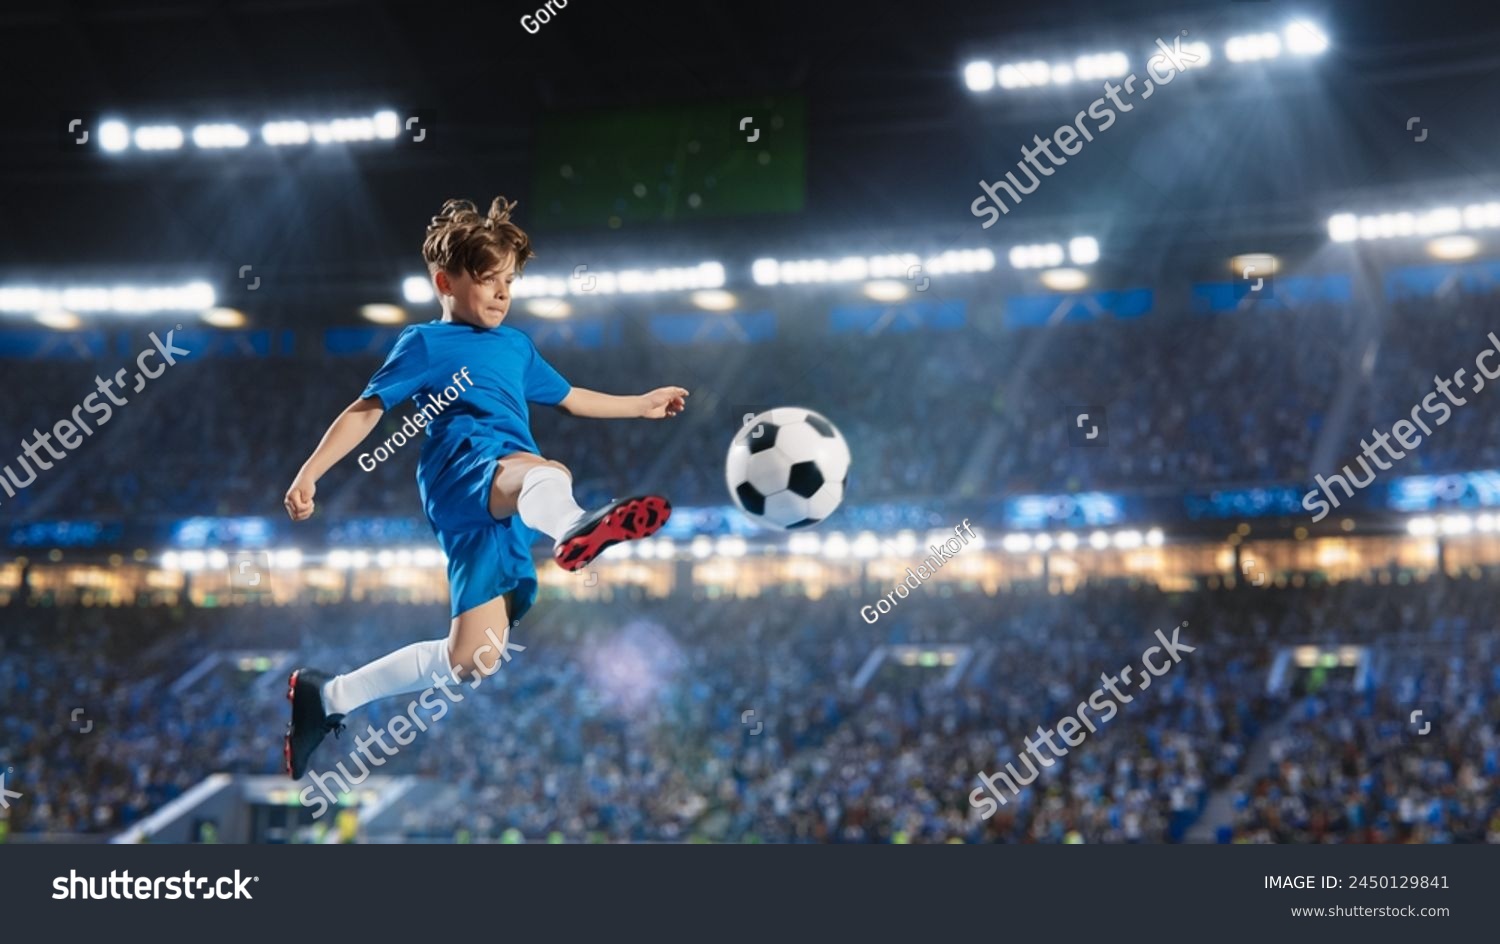 Aesthetic Shot Of Athletic Child Soccer Football Player Jumping And Kicking Ball Mid-Air On Stadium WIth Crowd Cheering. Young Boy Scoring a Winning Goal on Junior World Championship Tournament Match. #2450129841